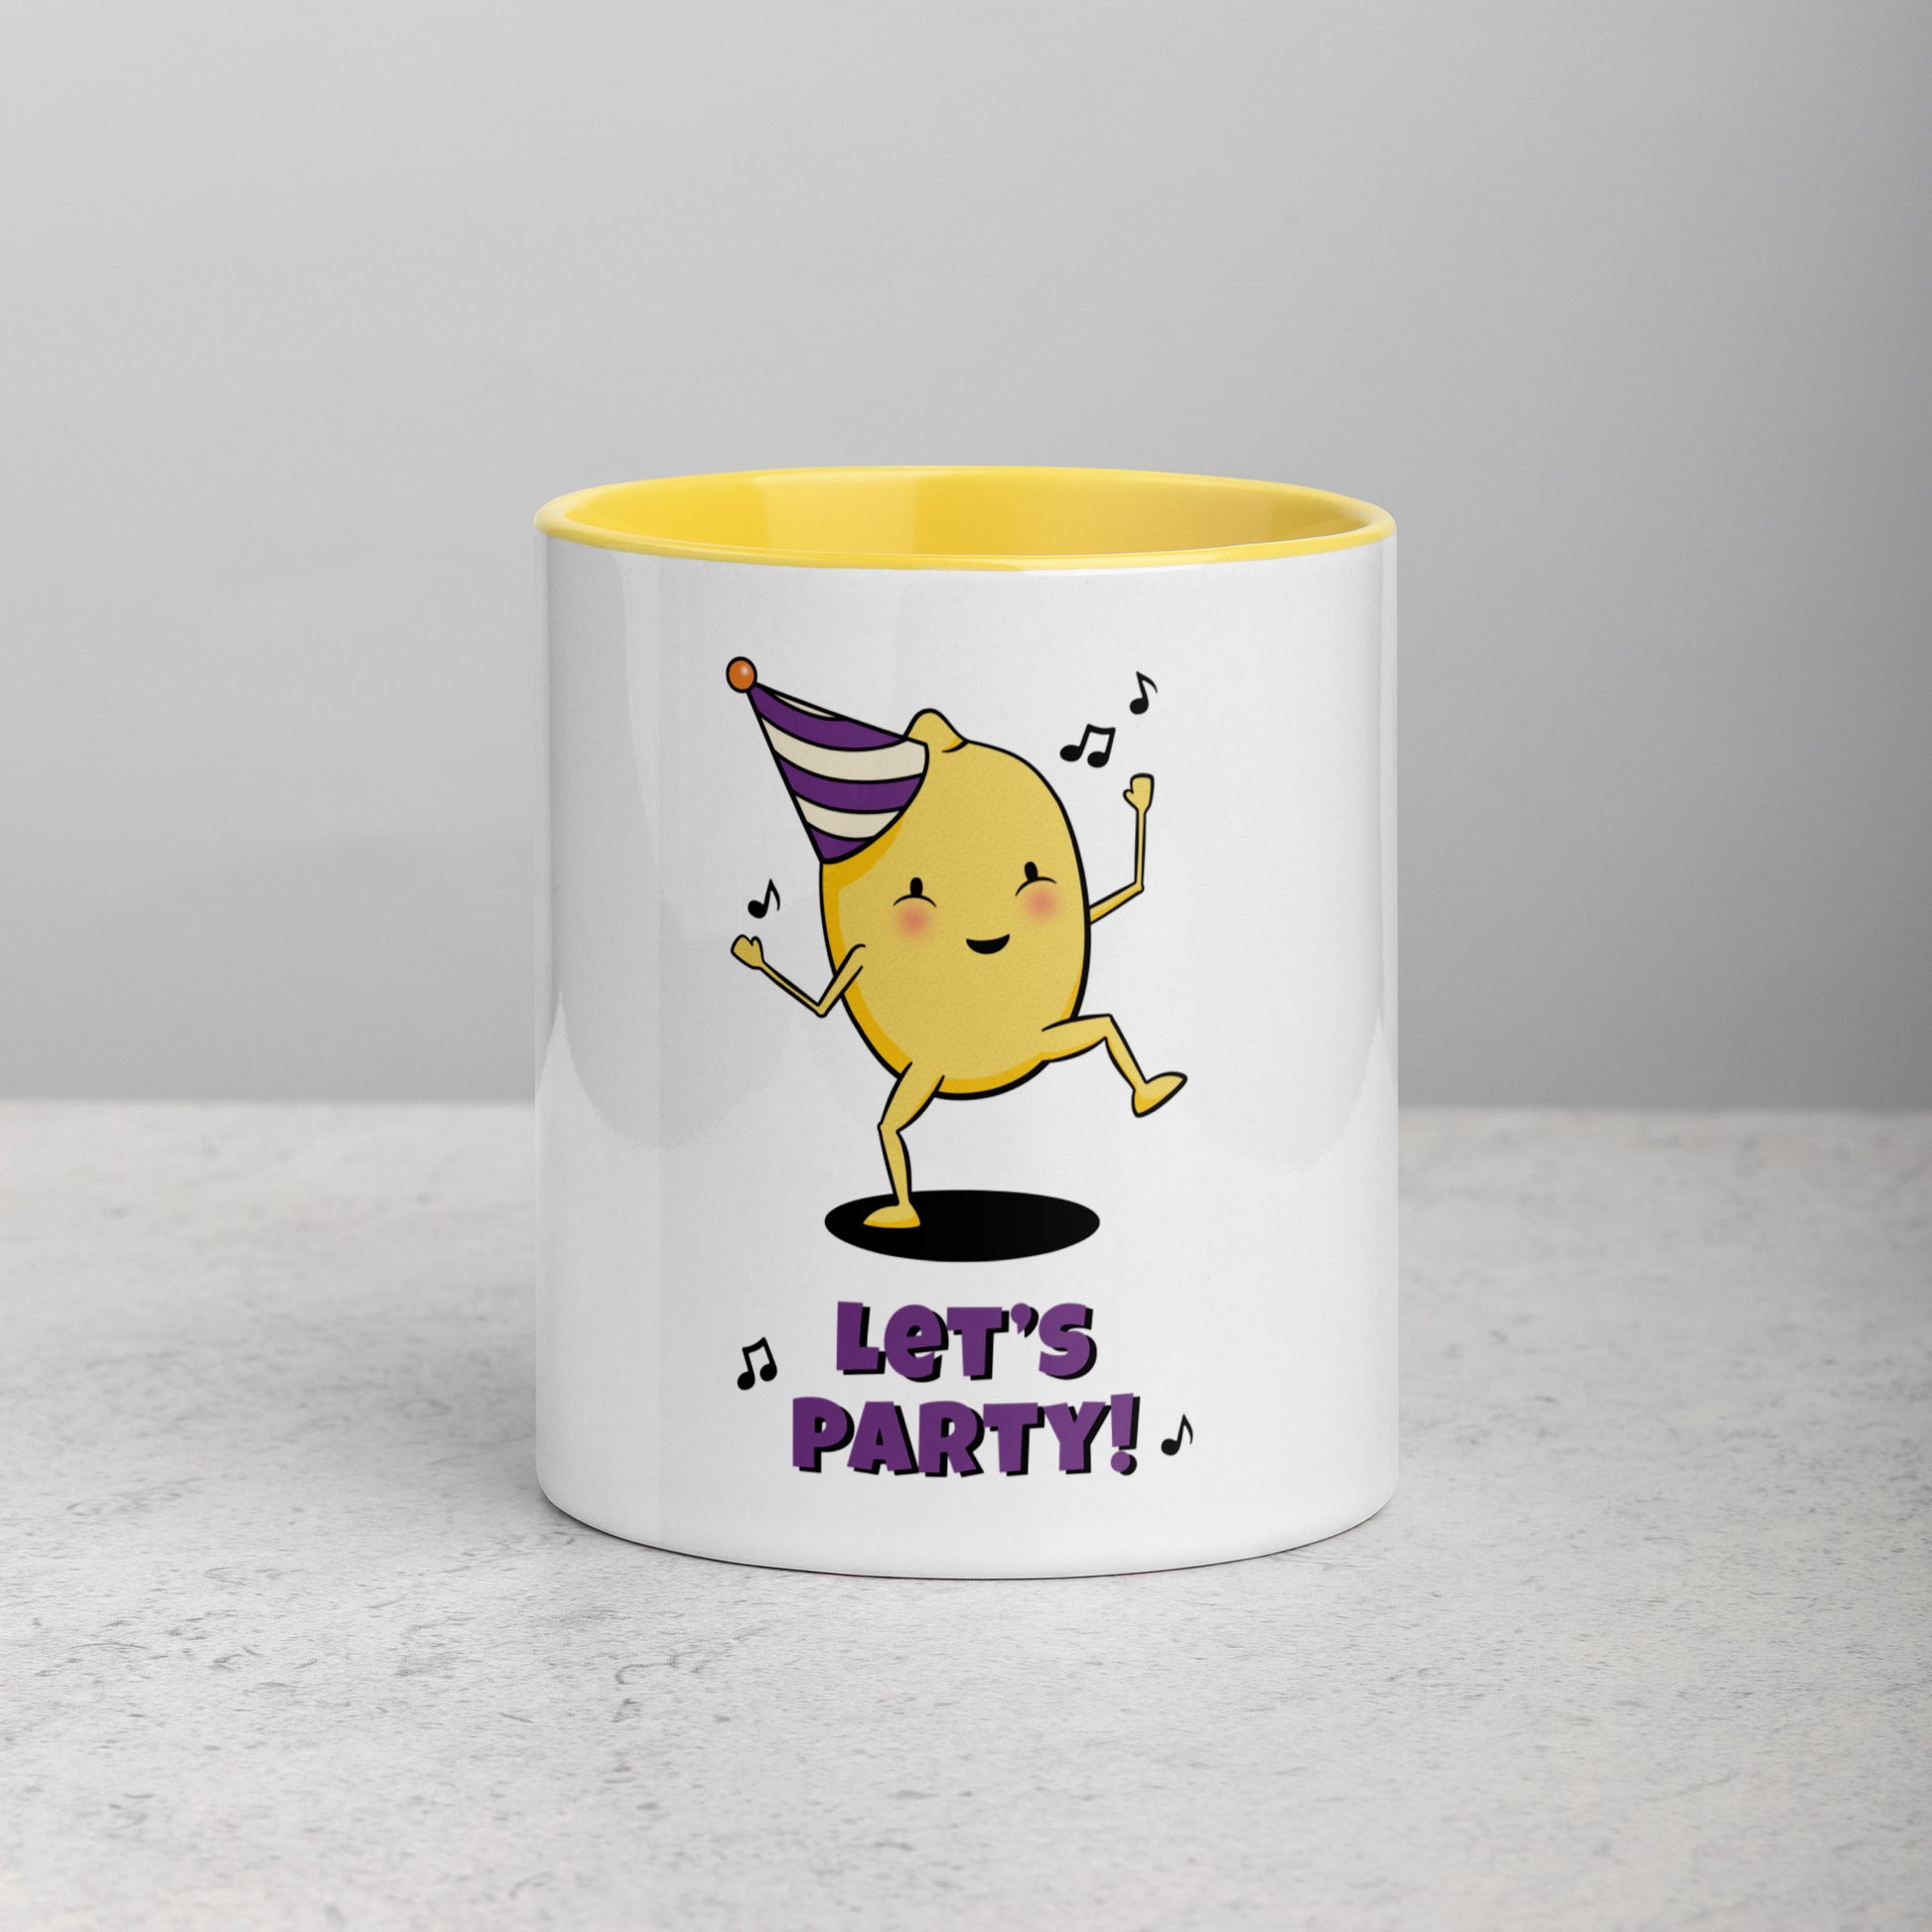 front facing white mug with yellow interior and handle. Mug has illustration of cute lemon character dancing with music notes wearing a purple and white party hat with the text Lets Party underneath it